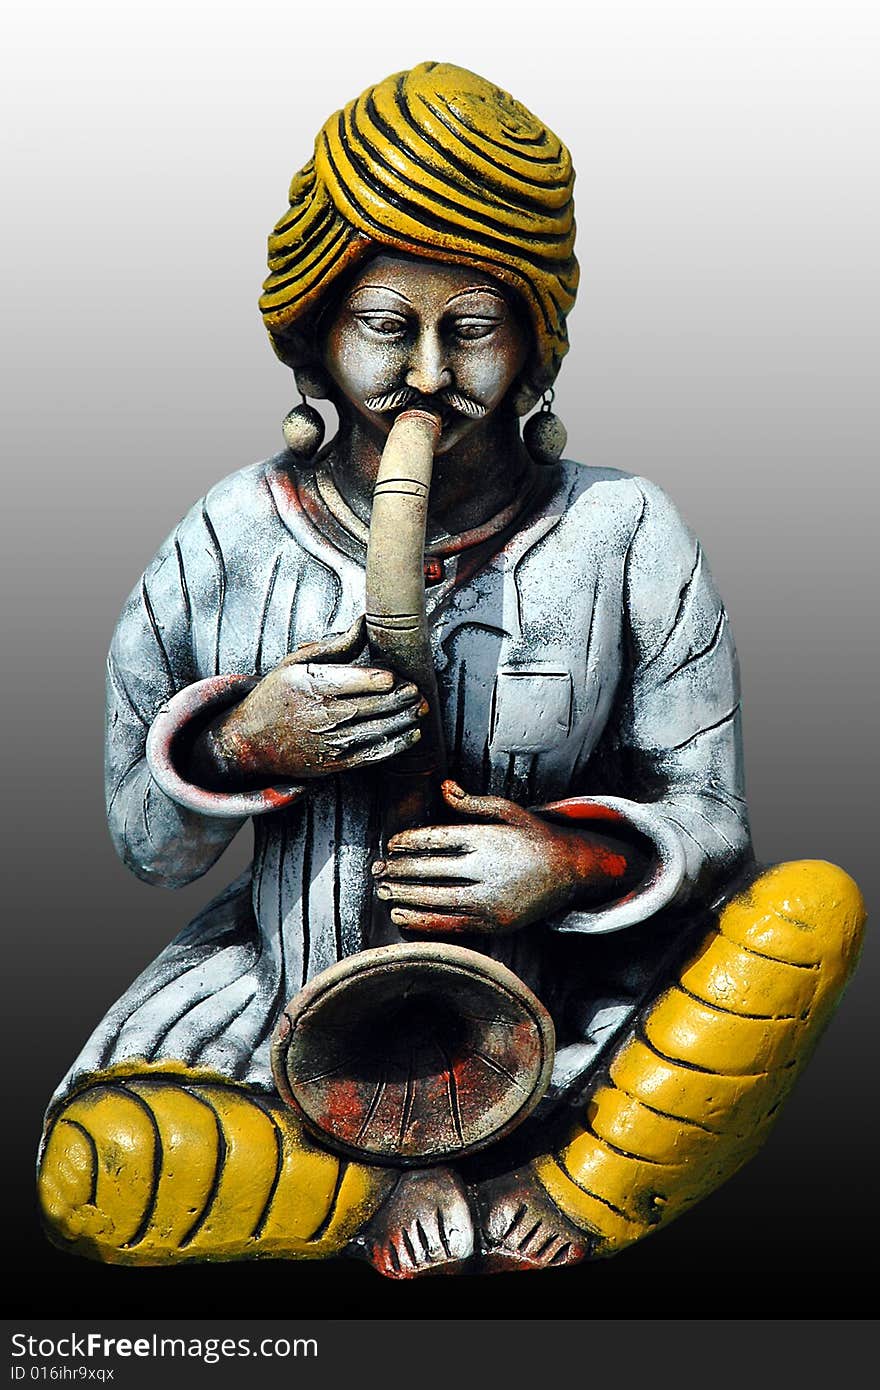 This beautiful, colorful craft is made from clay. A man playing Shahnai - an indian musical instrument. This beautiful, colorful craft is made from clay. A man playing Shahnai - an indian musical instrument.